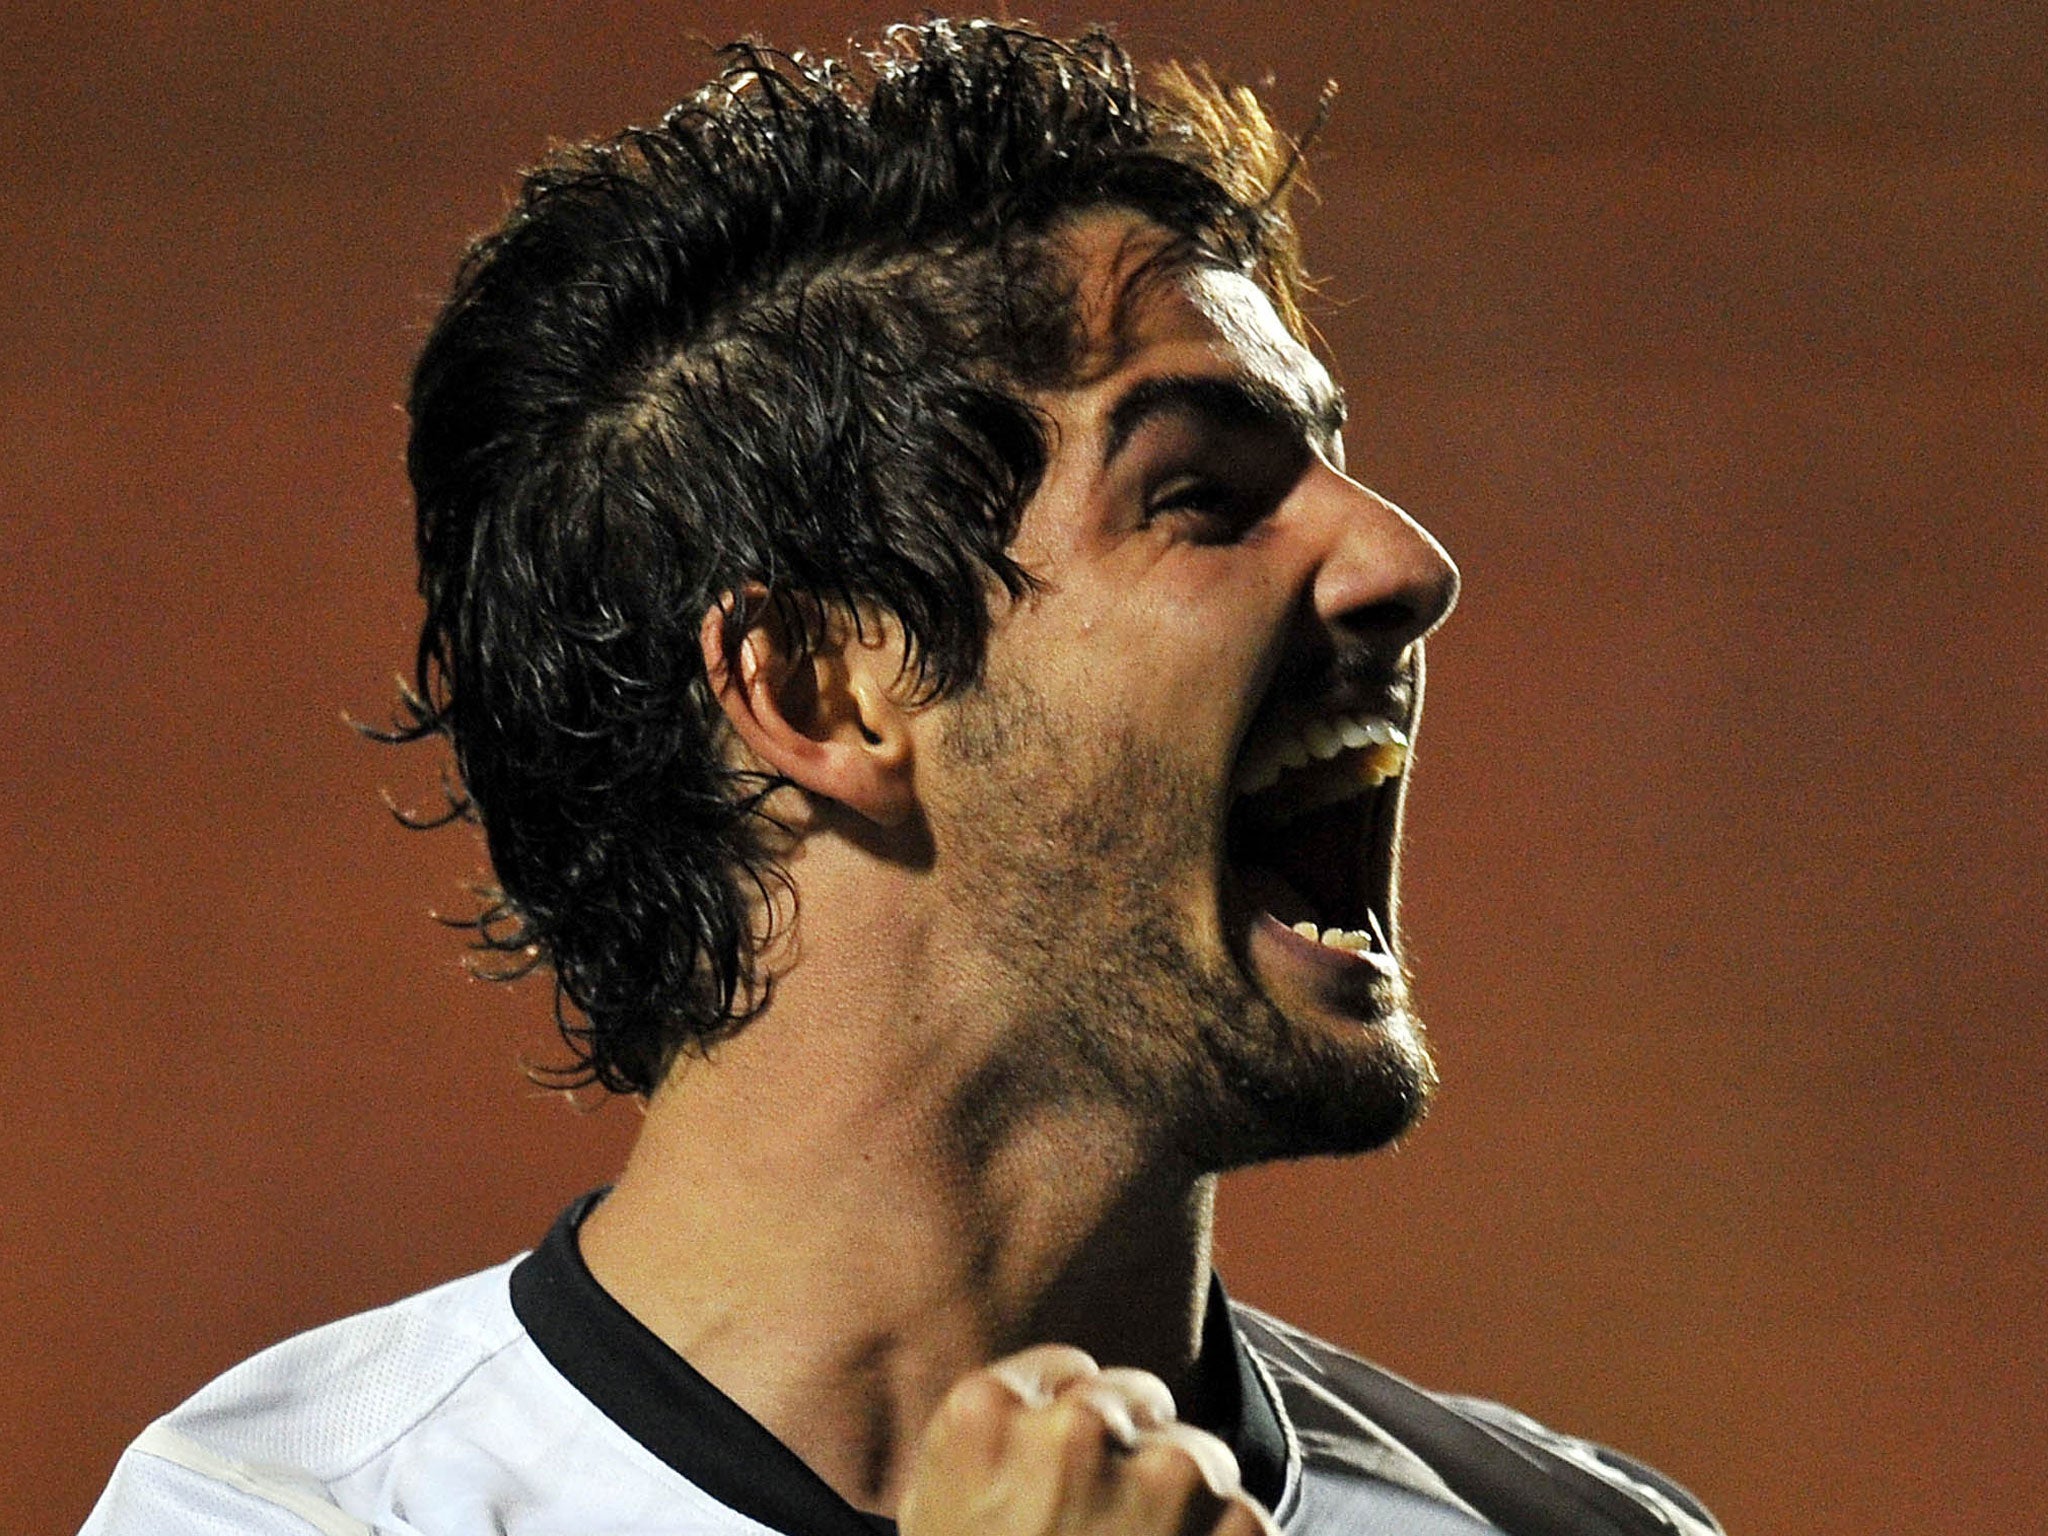 Alexandre Pato is likely to move to Italy, according to his agent